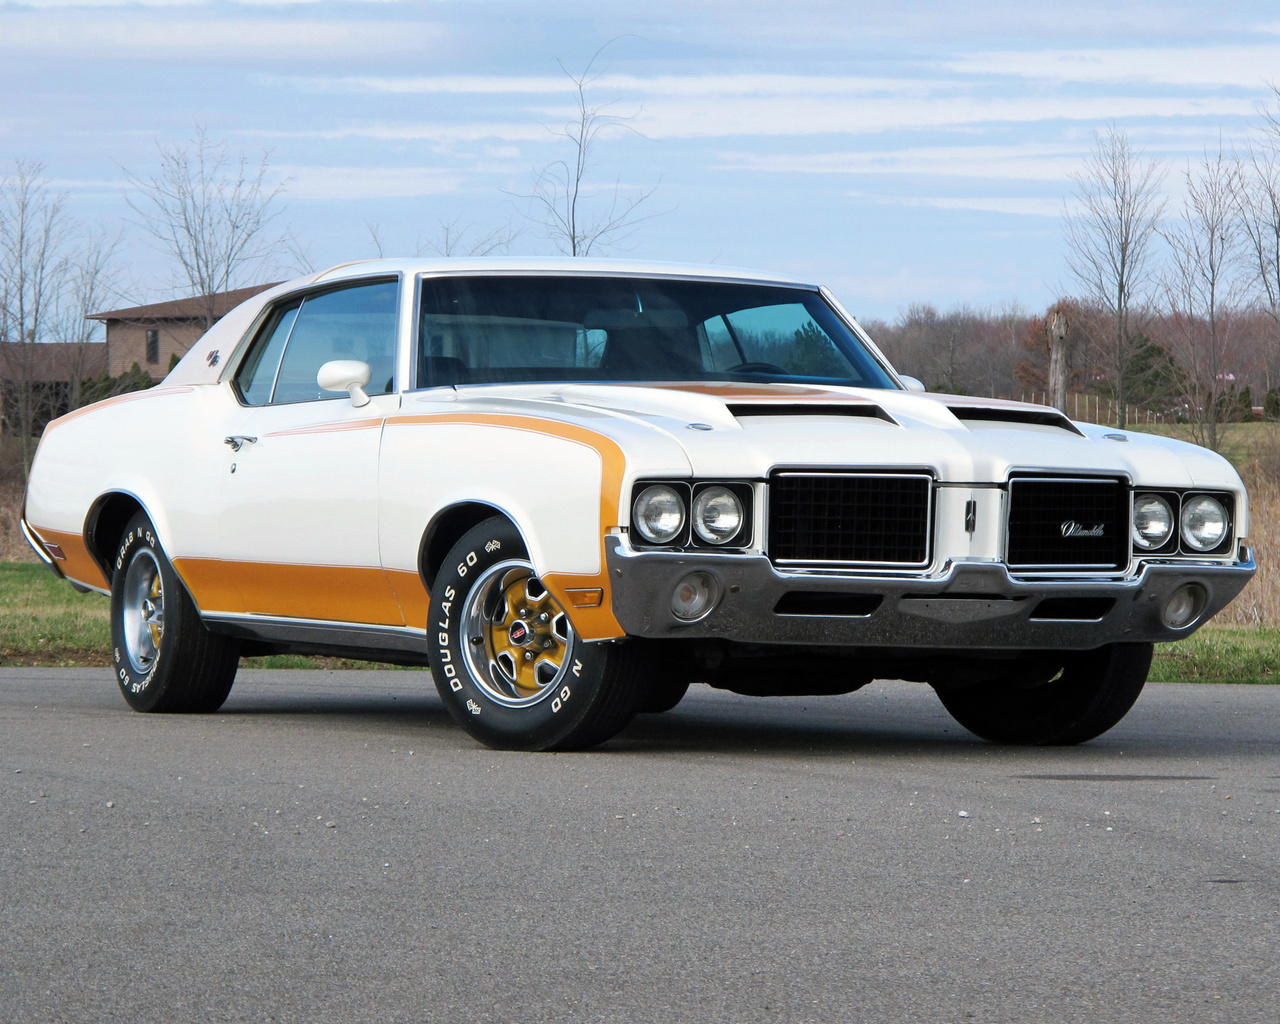 hurst, pace car, 1972, coupe, cutlass, oldsmobile, indy 500, the oldsmobile, hardtop